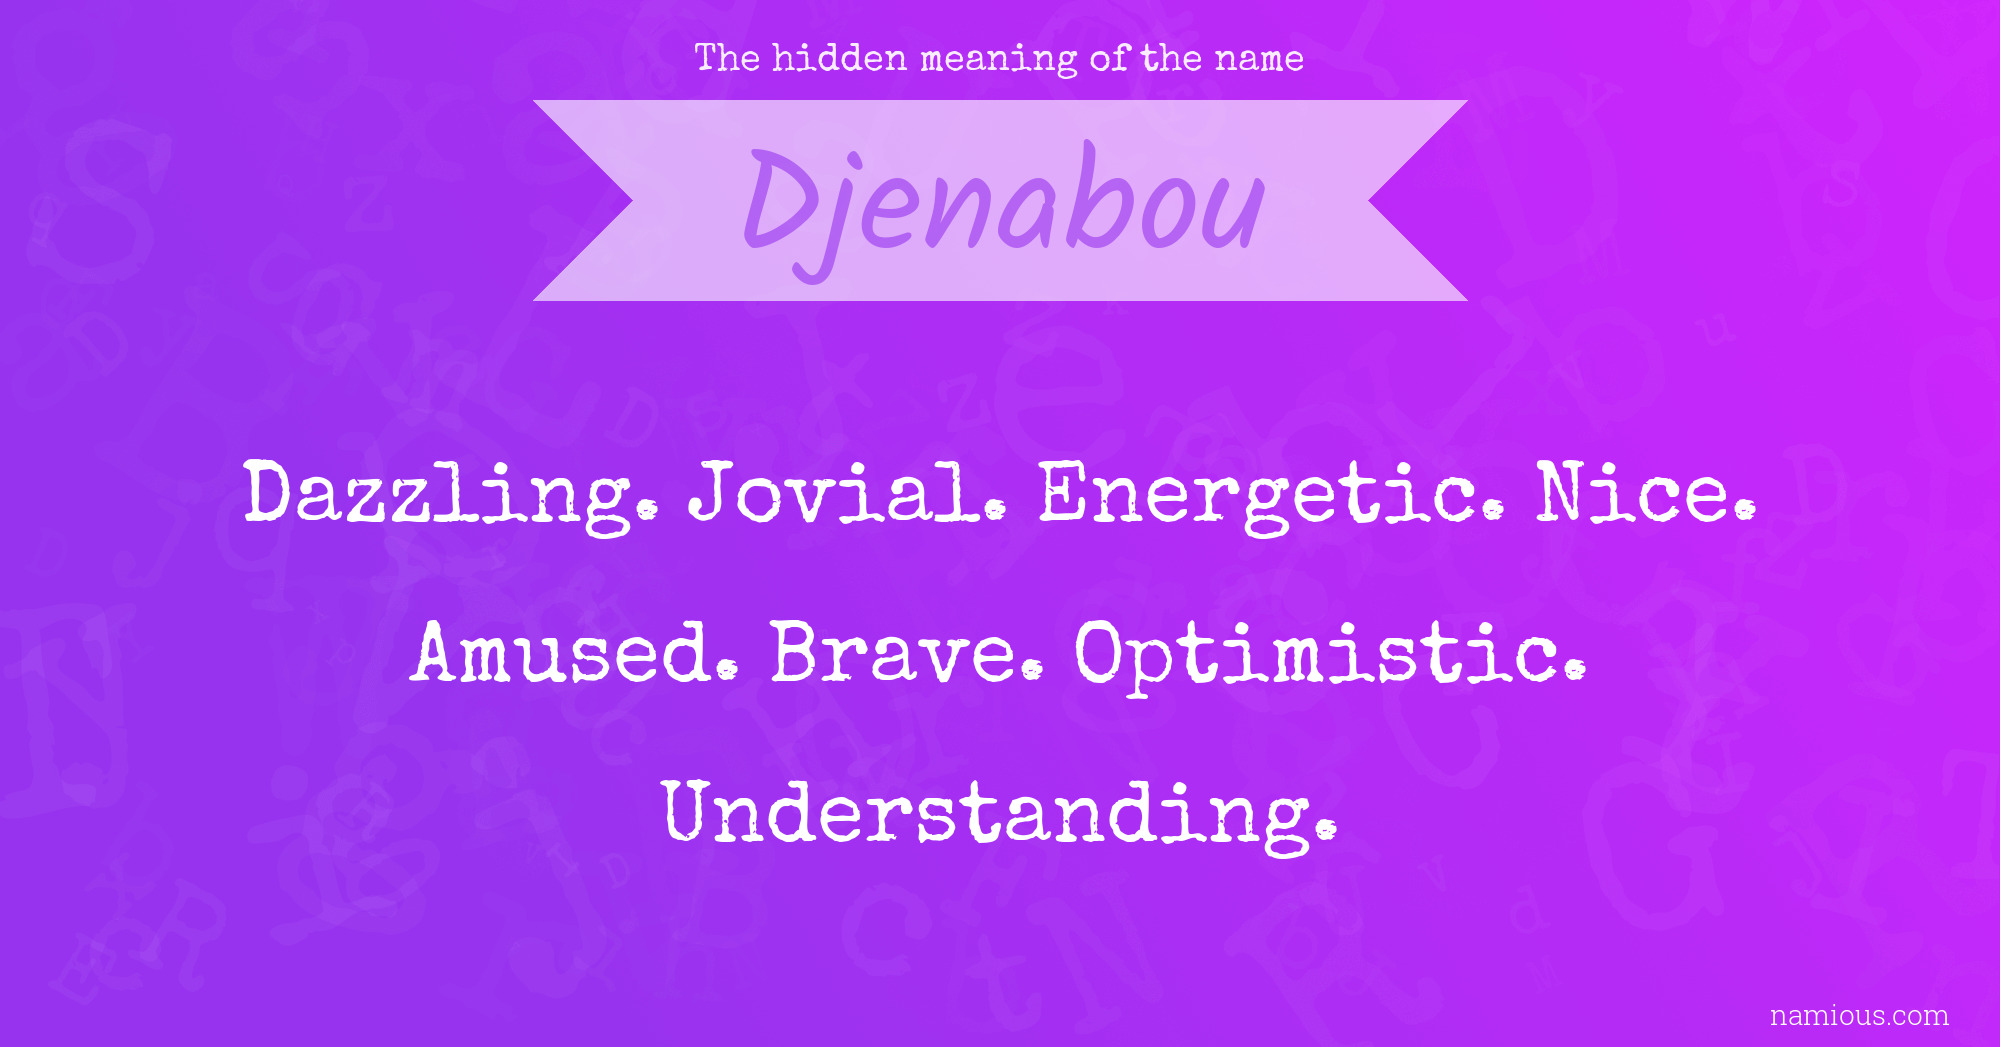 The hidden meaning of the name Djenabou